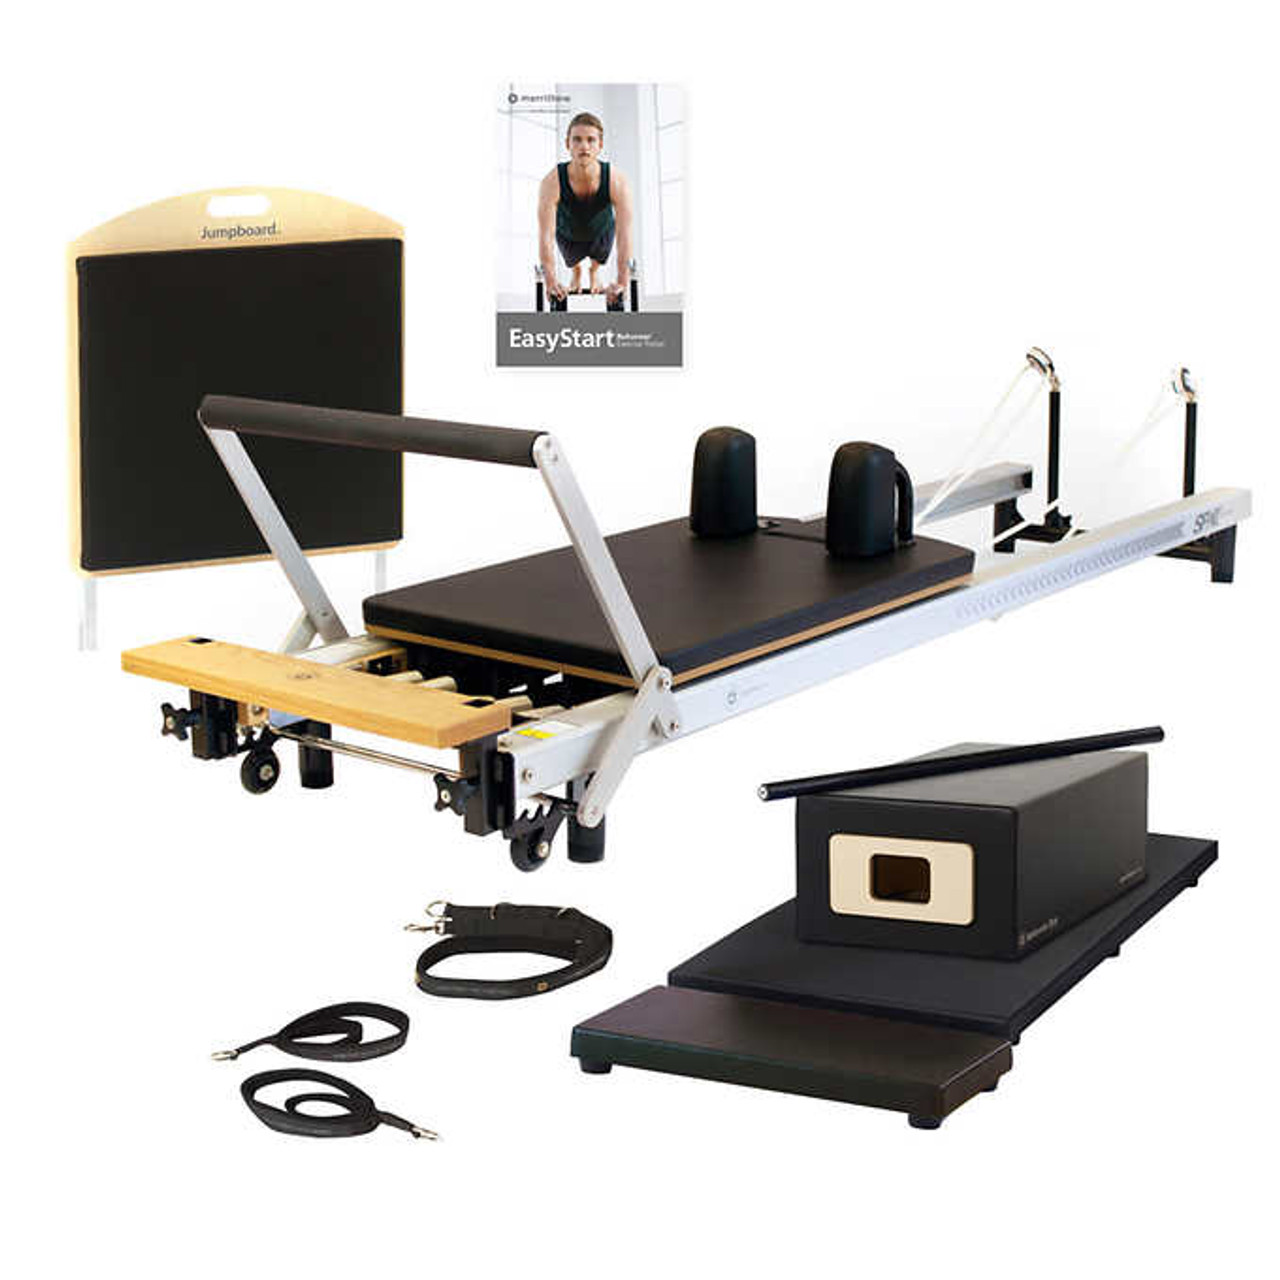 Complete At Home SPX Reformer Package by Merrithew/STOTT PILATES - Chicken Pieces